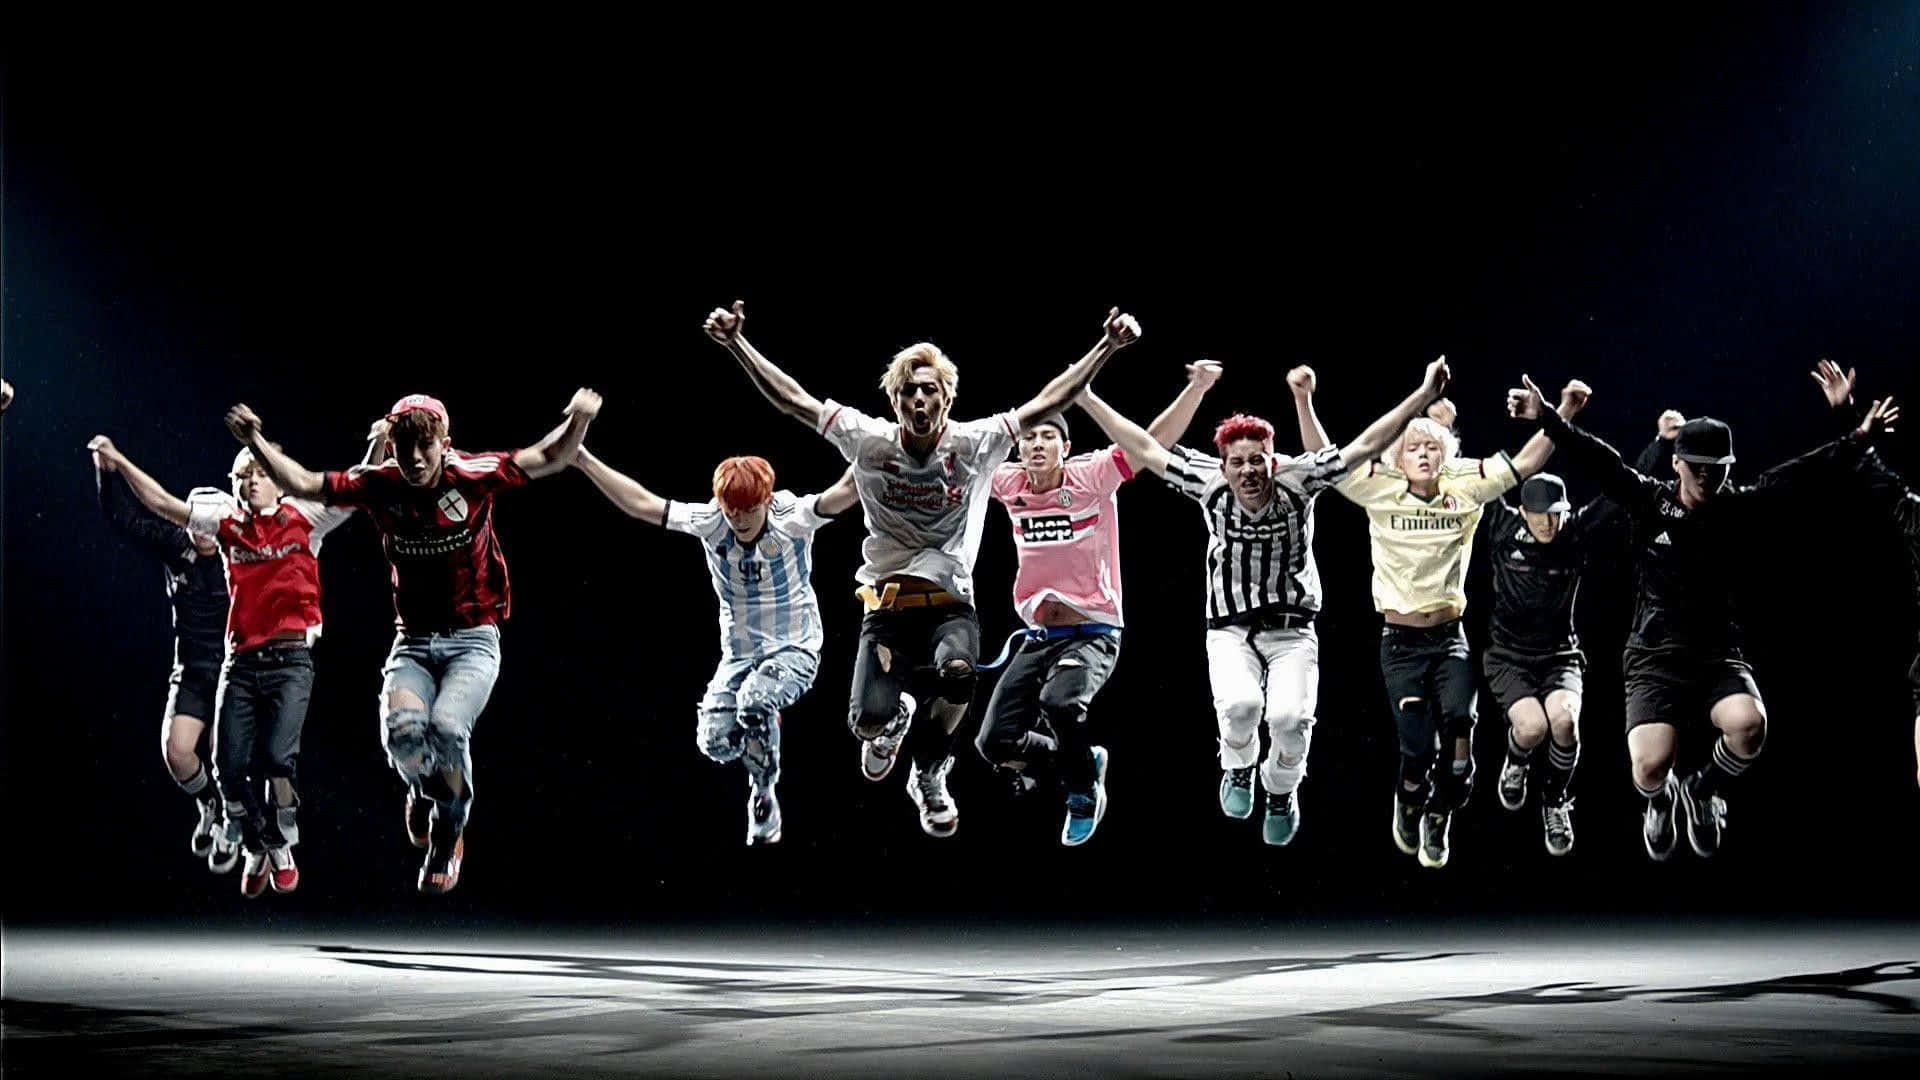 A Group Of People Jumping In The Air Background